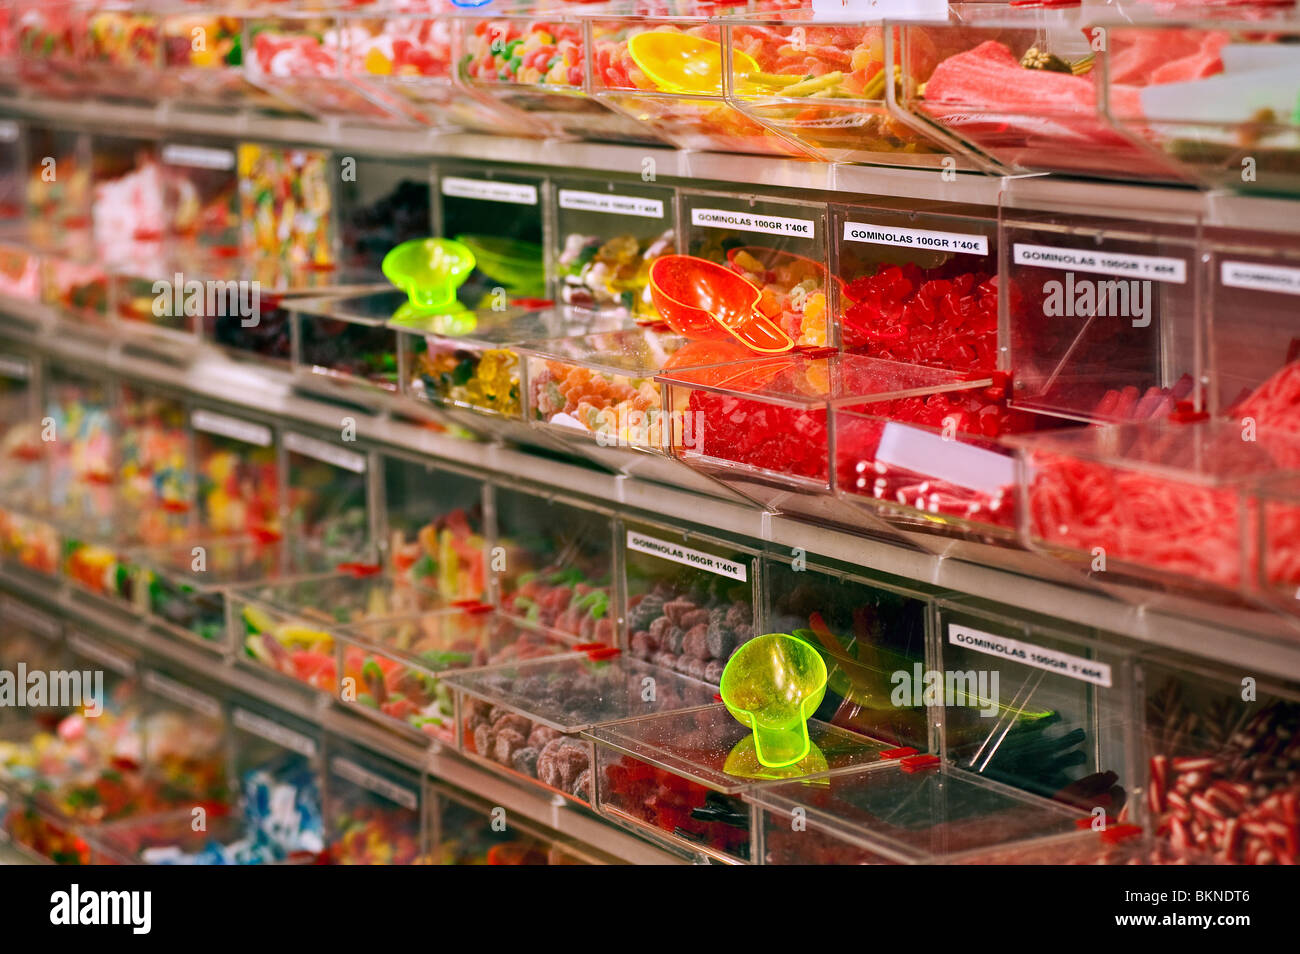 Bins of candy in a store, Madrid, Spain Stock Photo